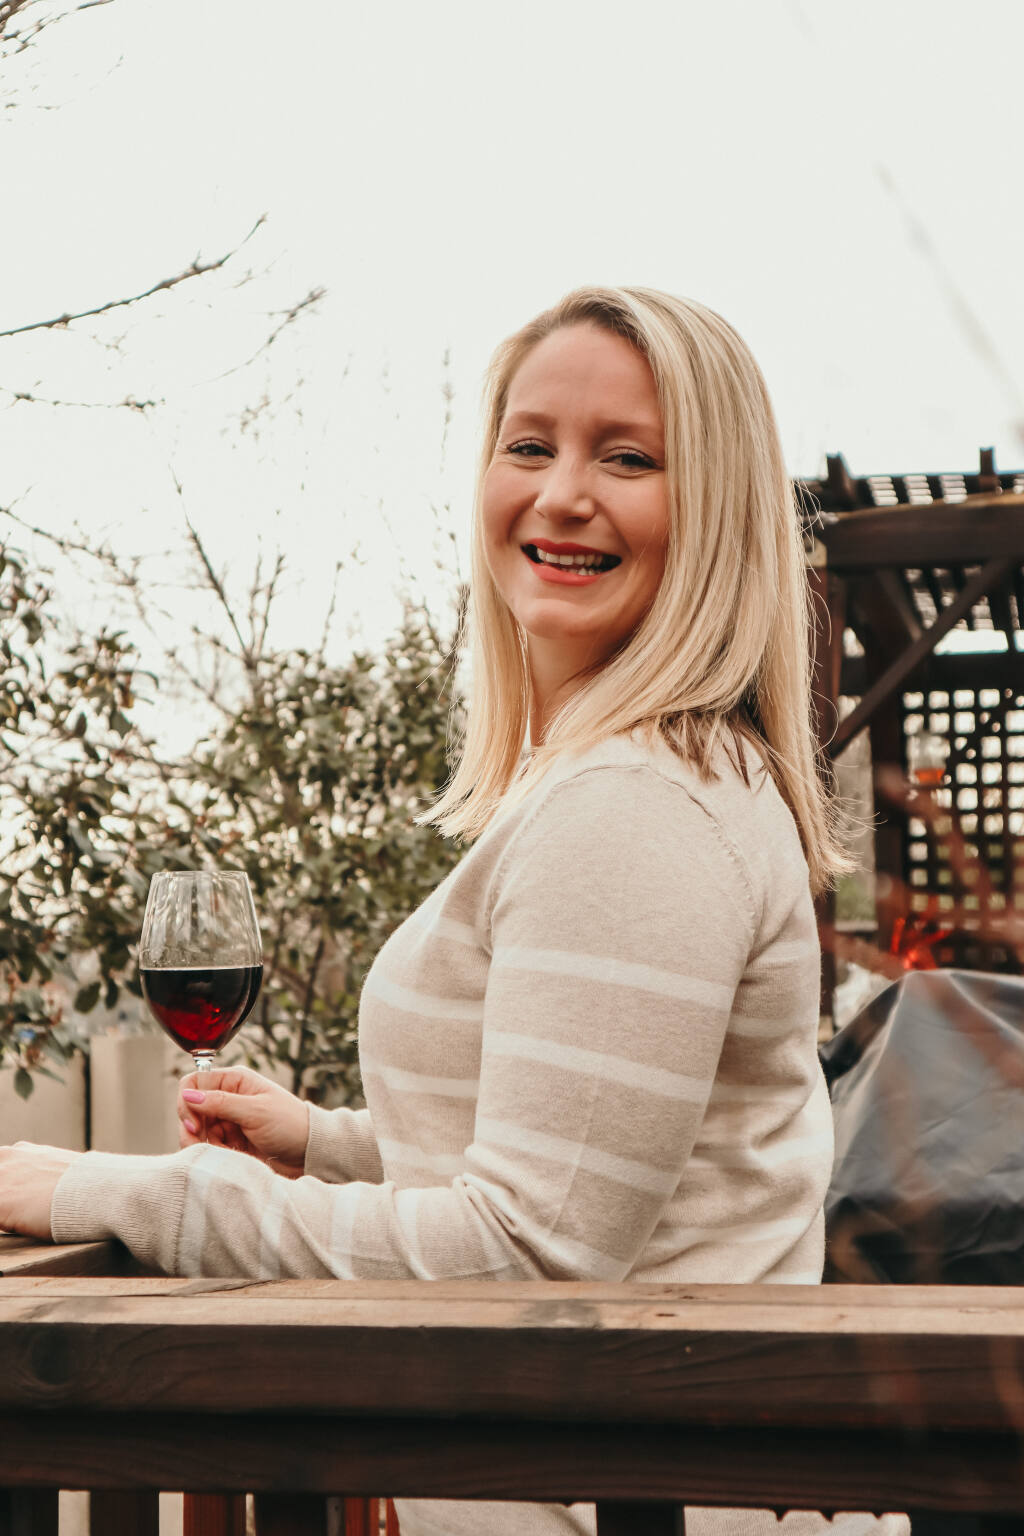 Natalie Owdom, 29, general manager, Muscardini Cellars, Kenwood, is a North Bay Business Journal 2021 Forty Under 40 winner.